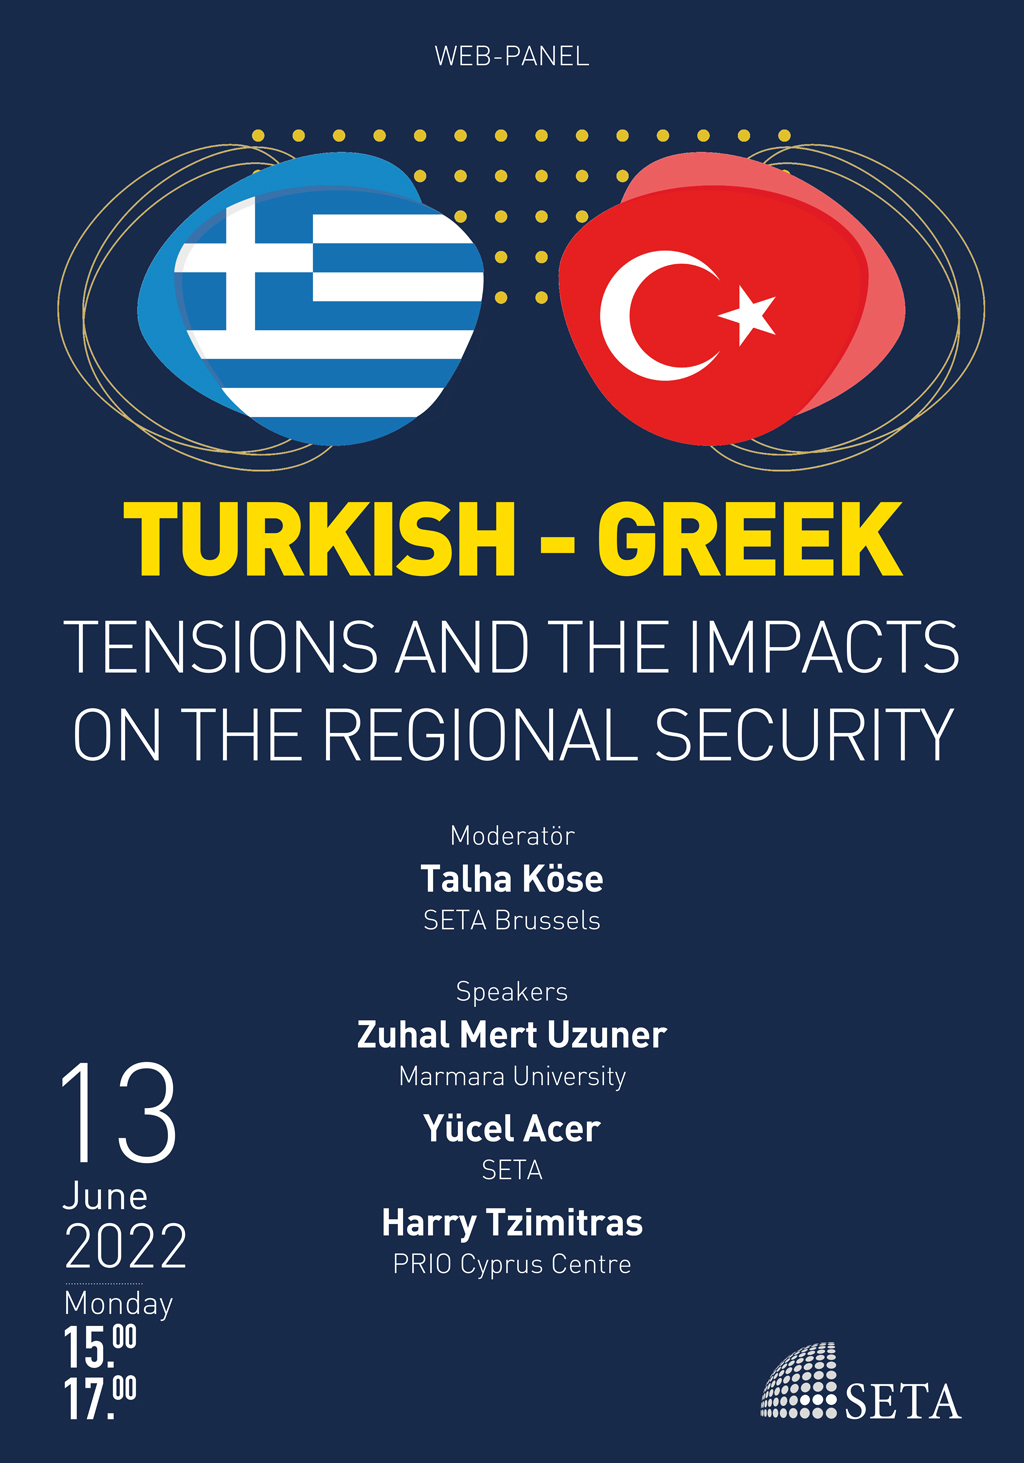 Web Panel: Turkish-Greek Tensions and the Impacts on the Regional Security